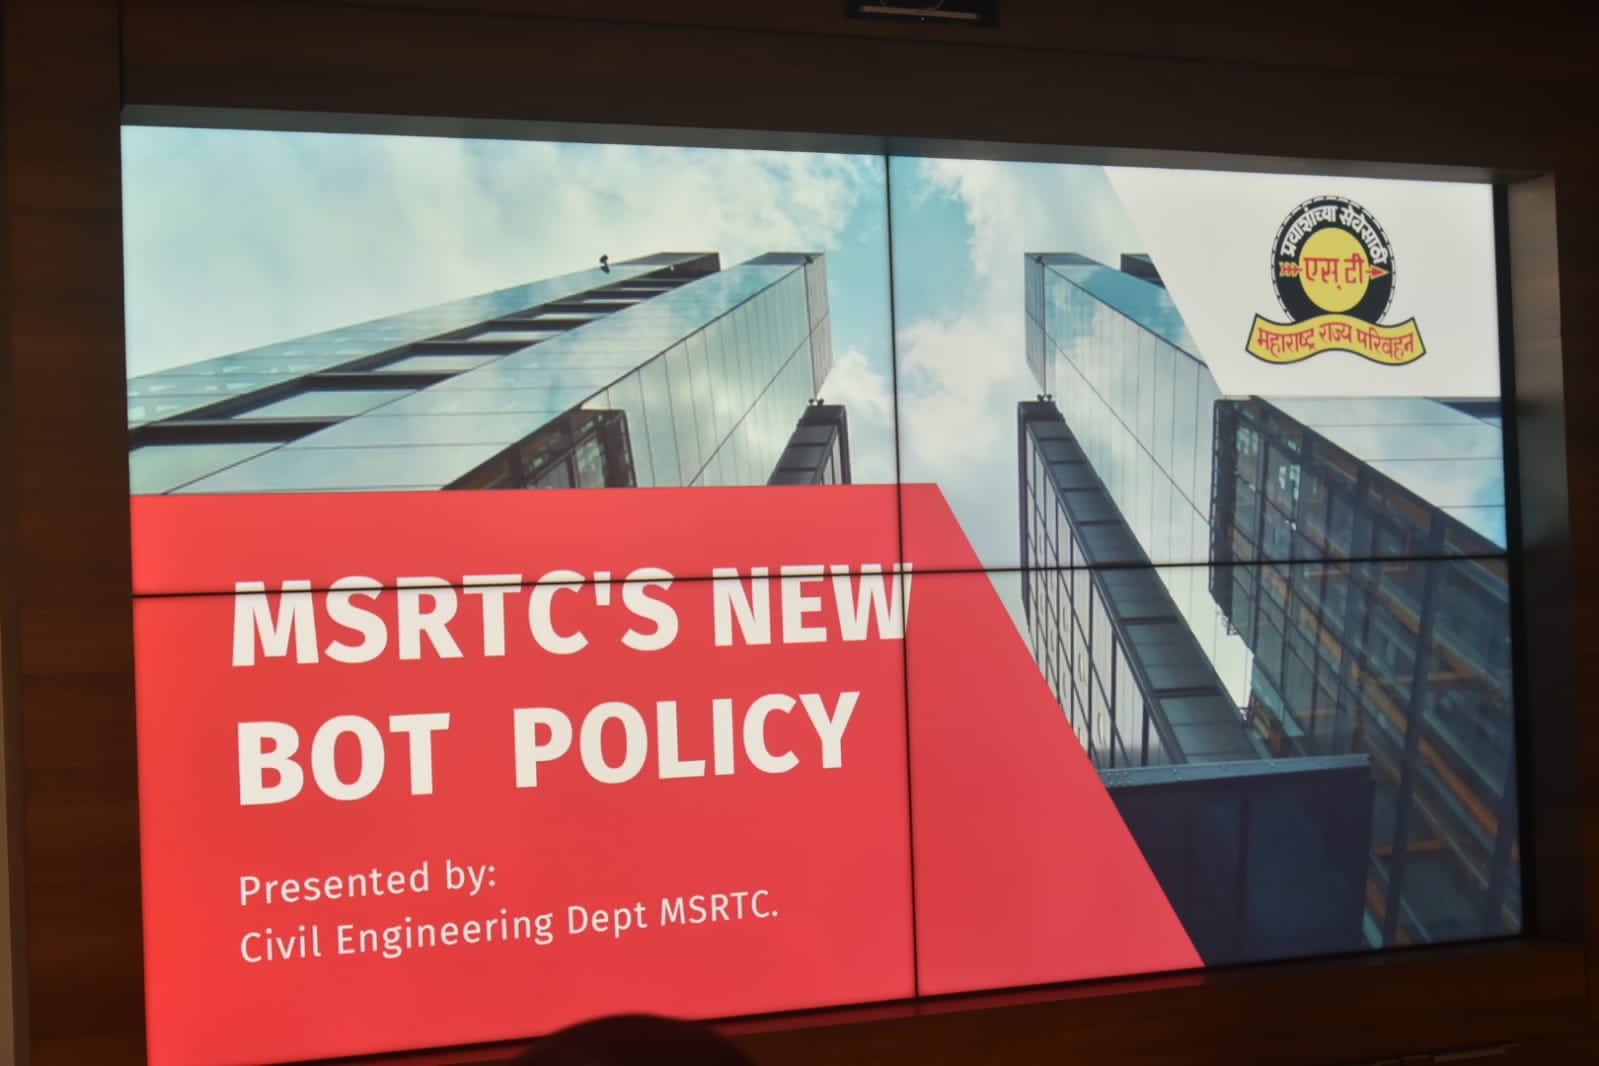 Maharashtra Government Accepts Presentation and Proposed Changes in Current BOT Policy of MSRTC